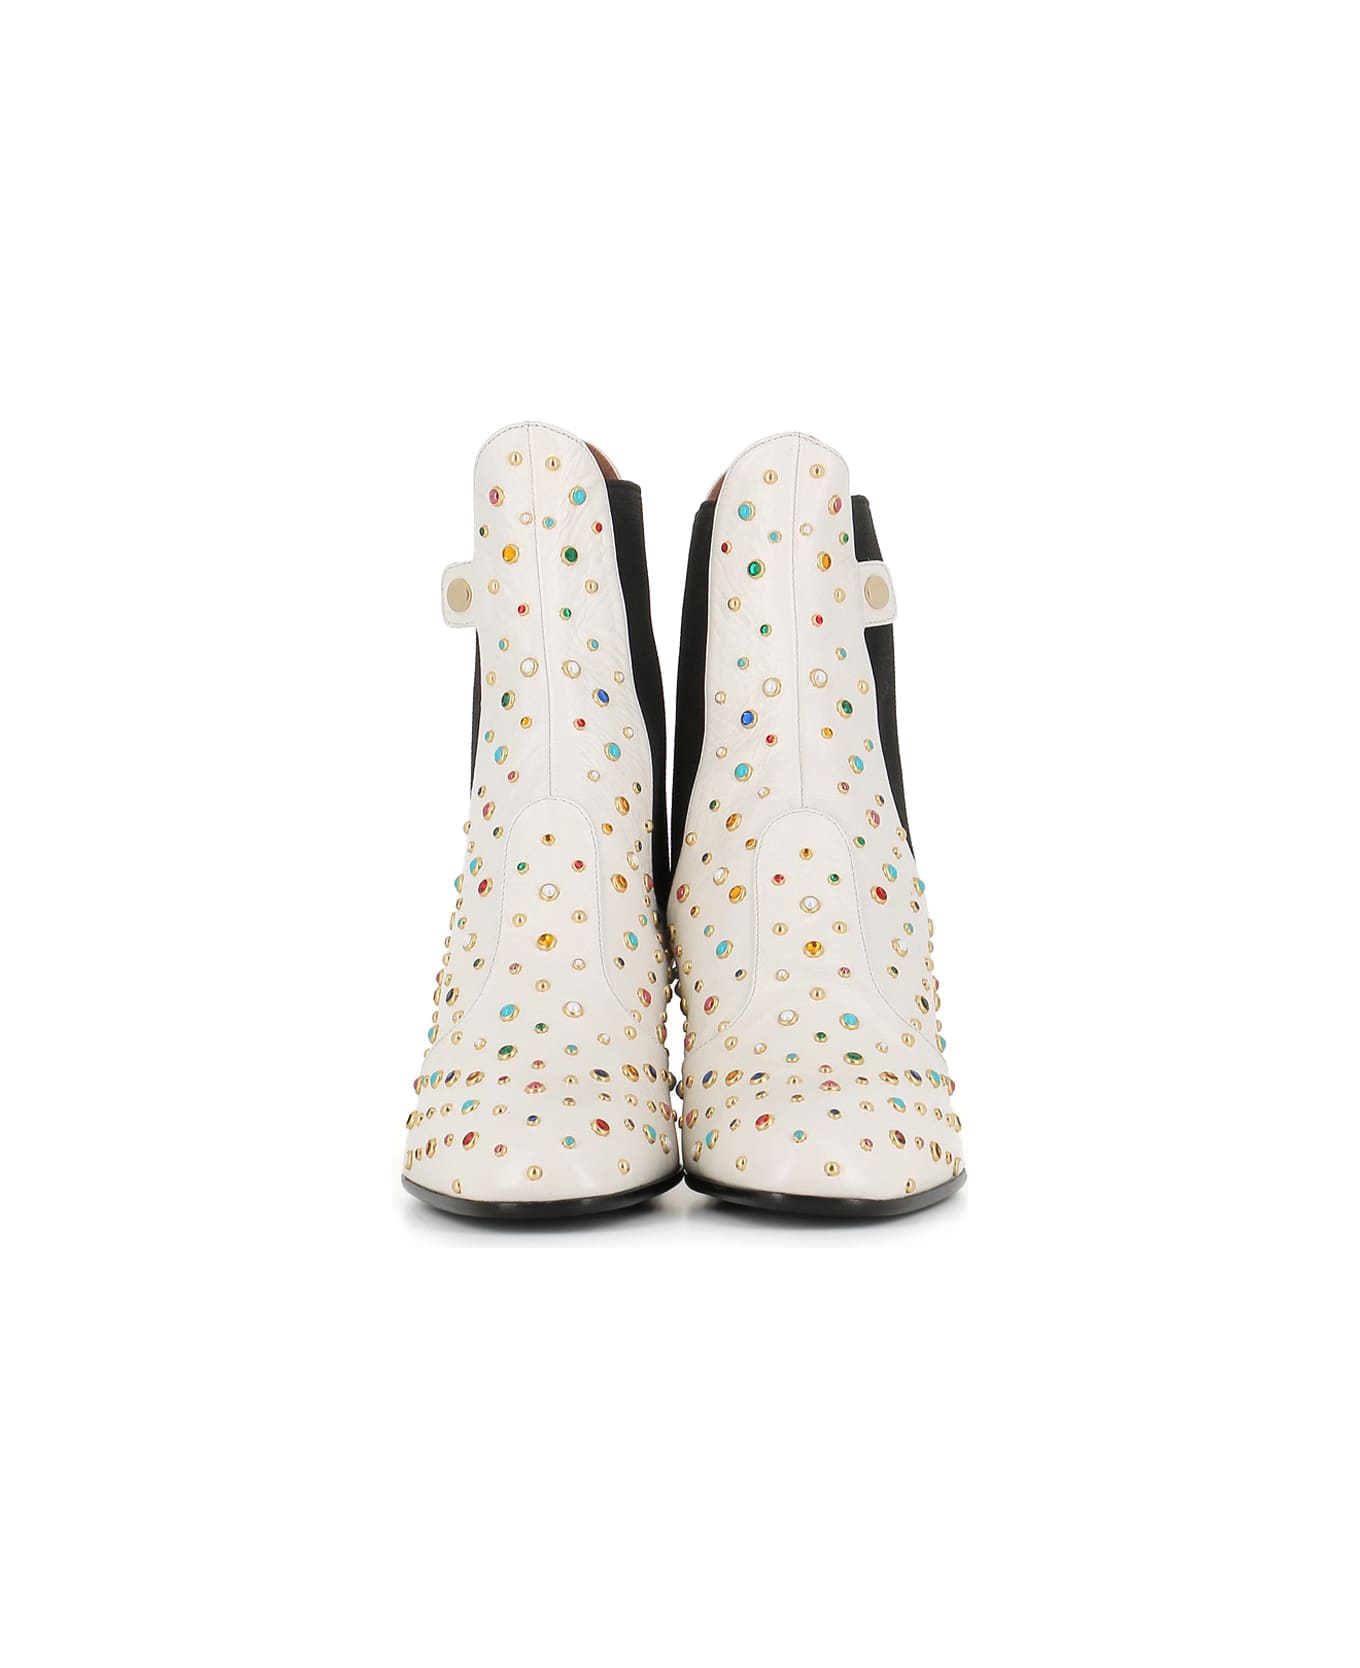 Laurence Dacade Boot Angie Multicolor Studs - White